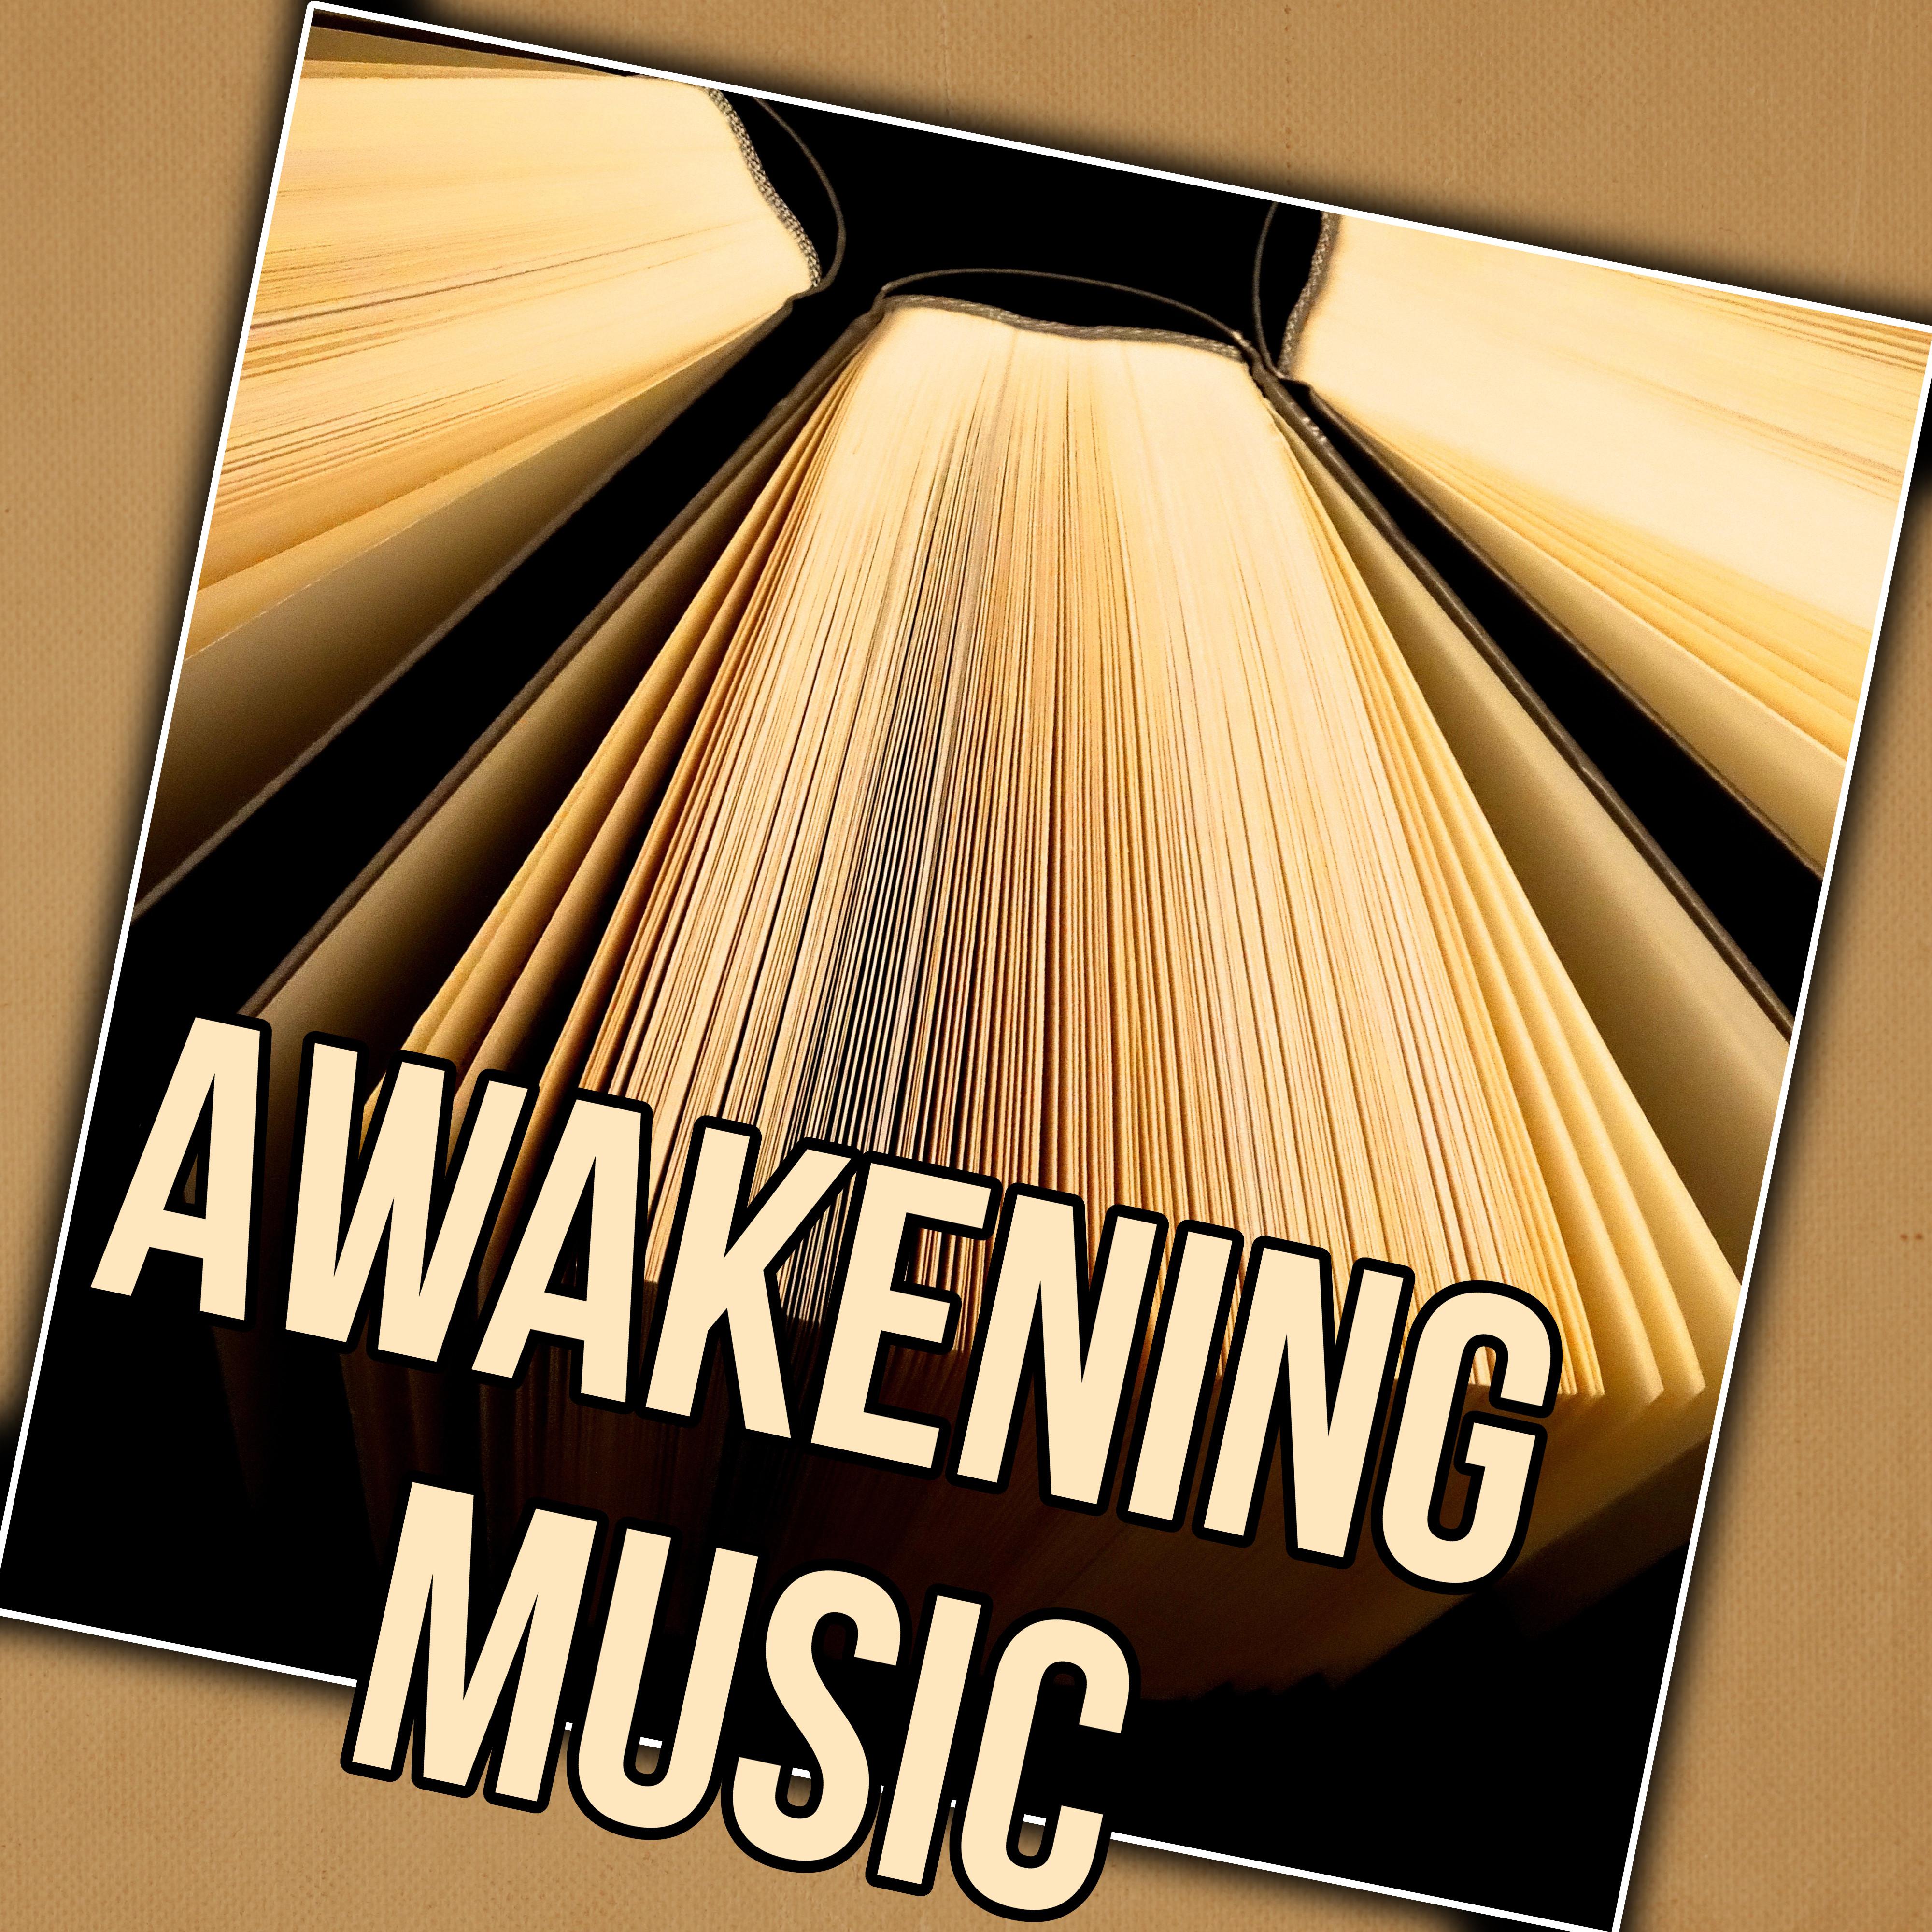 Awakening Music - Lounge Music for Study, Spa, Massage, Soothing Sounds for Restful Sleep, Inner Peace